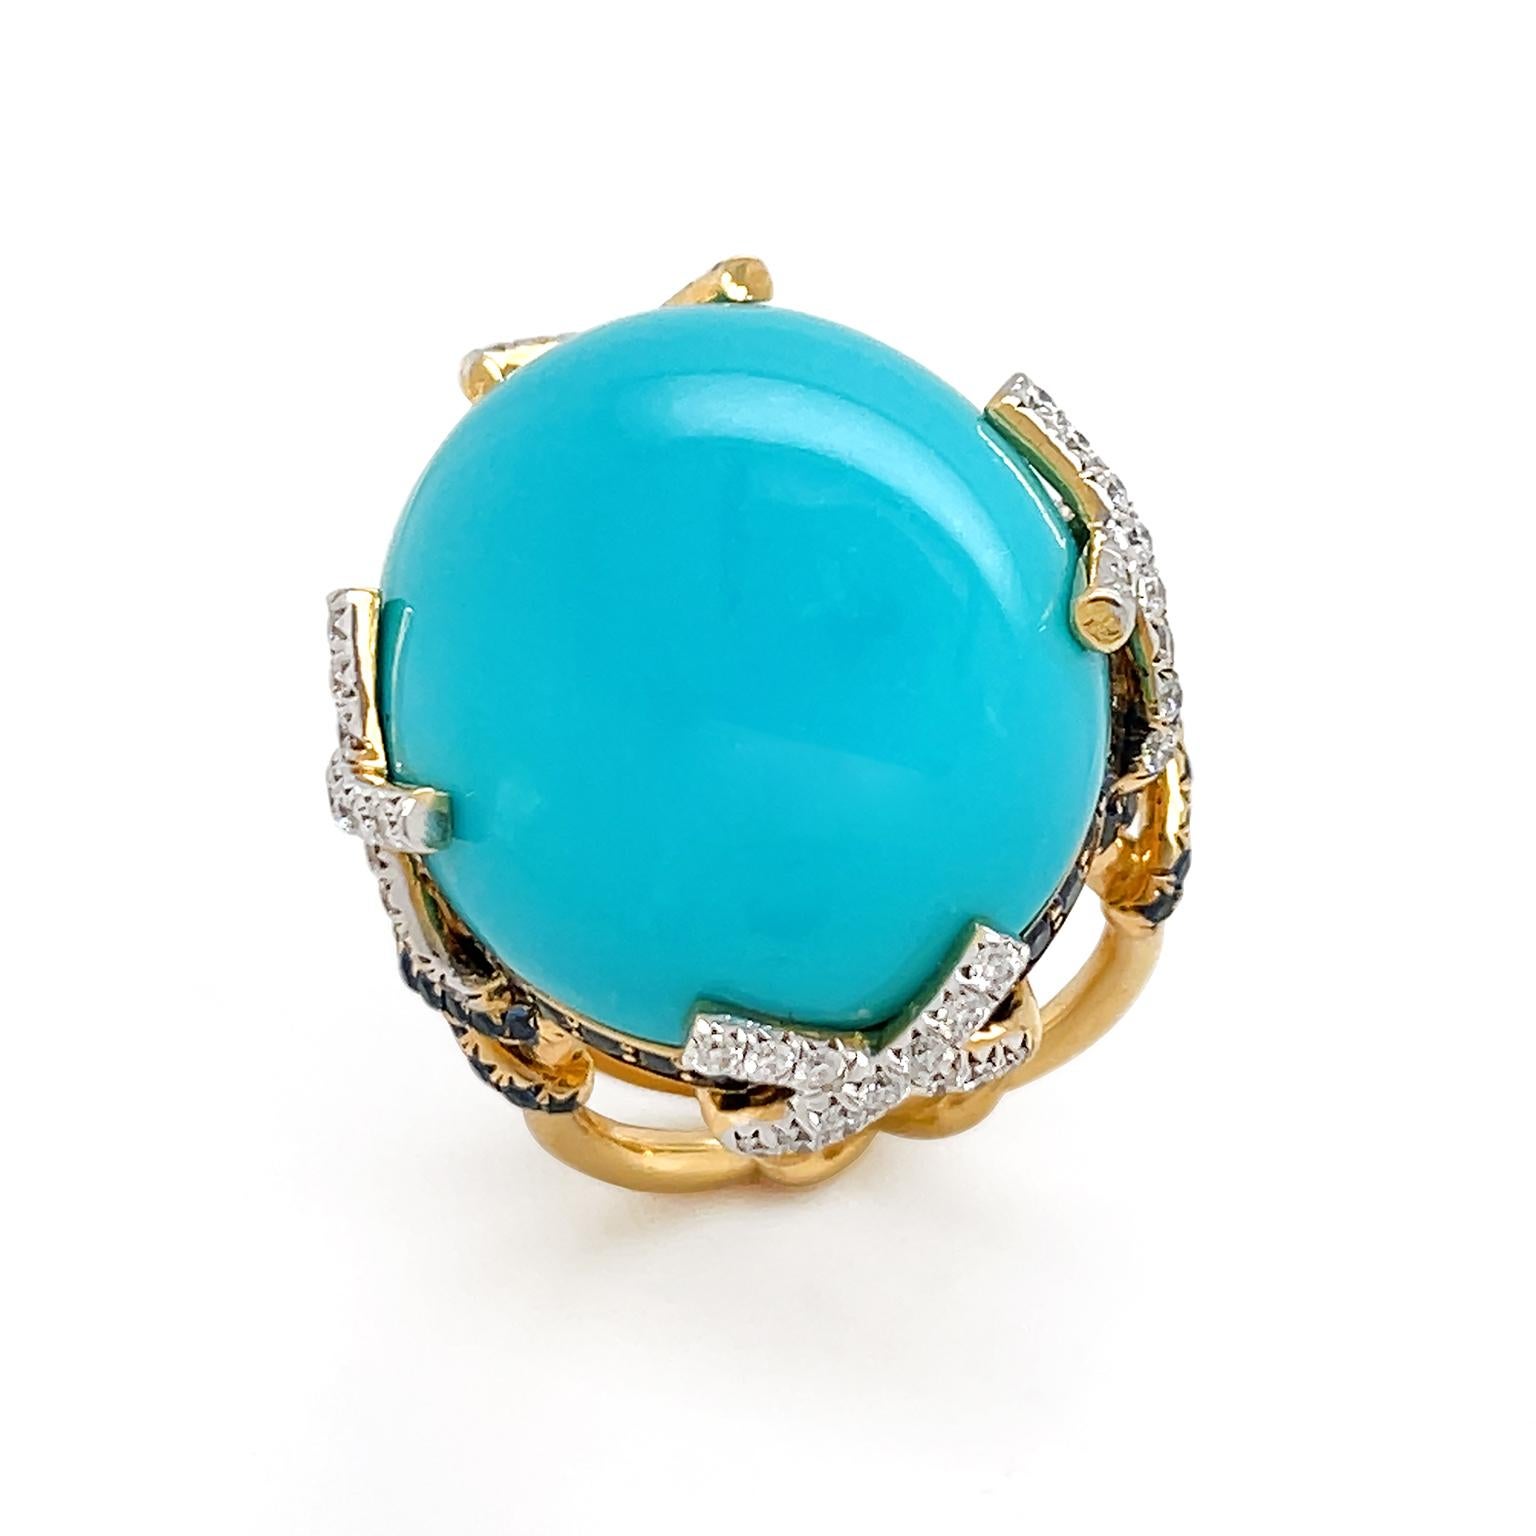 The polished blue-green beauty of turquoise is enhanced by precious gemstones of diamonds and sapphires for this ring. An oval cabochon turquoise is an apex, held in place by intercrossed 18k yellow gold strands with pavé-set brilliant cut diamonds.